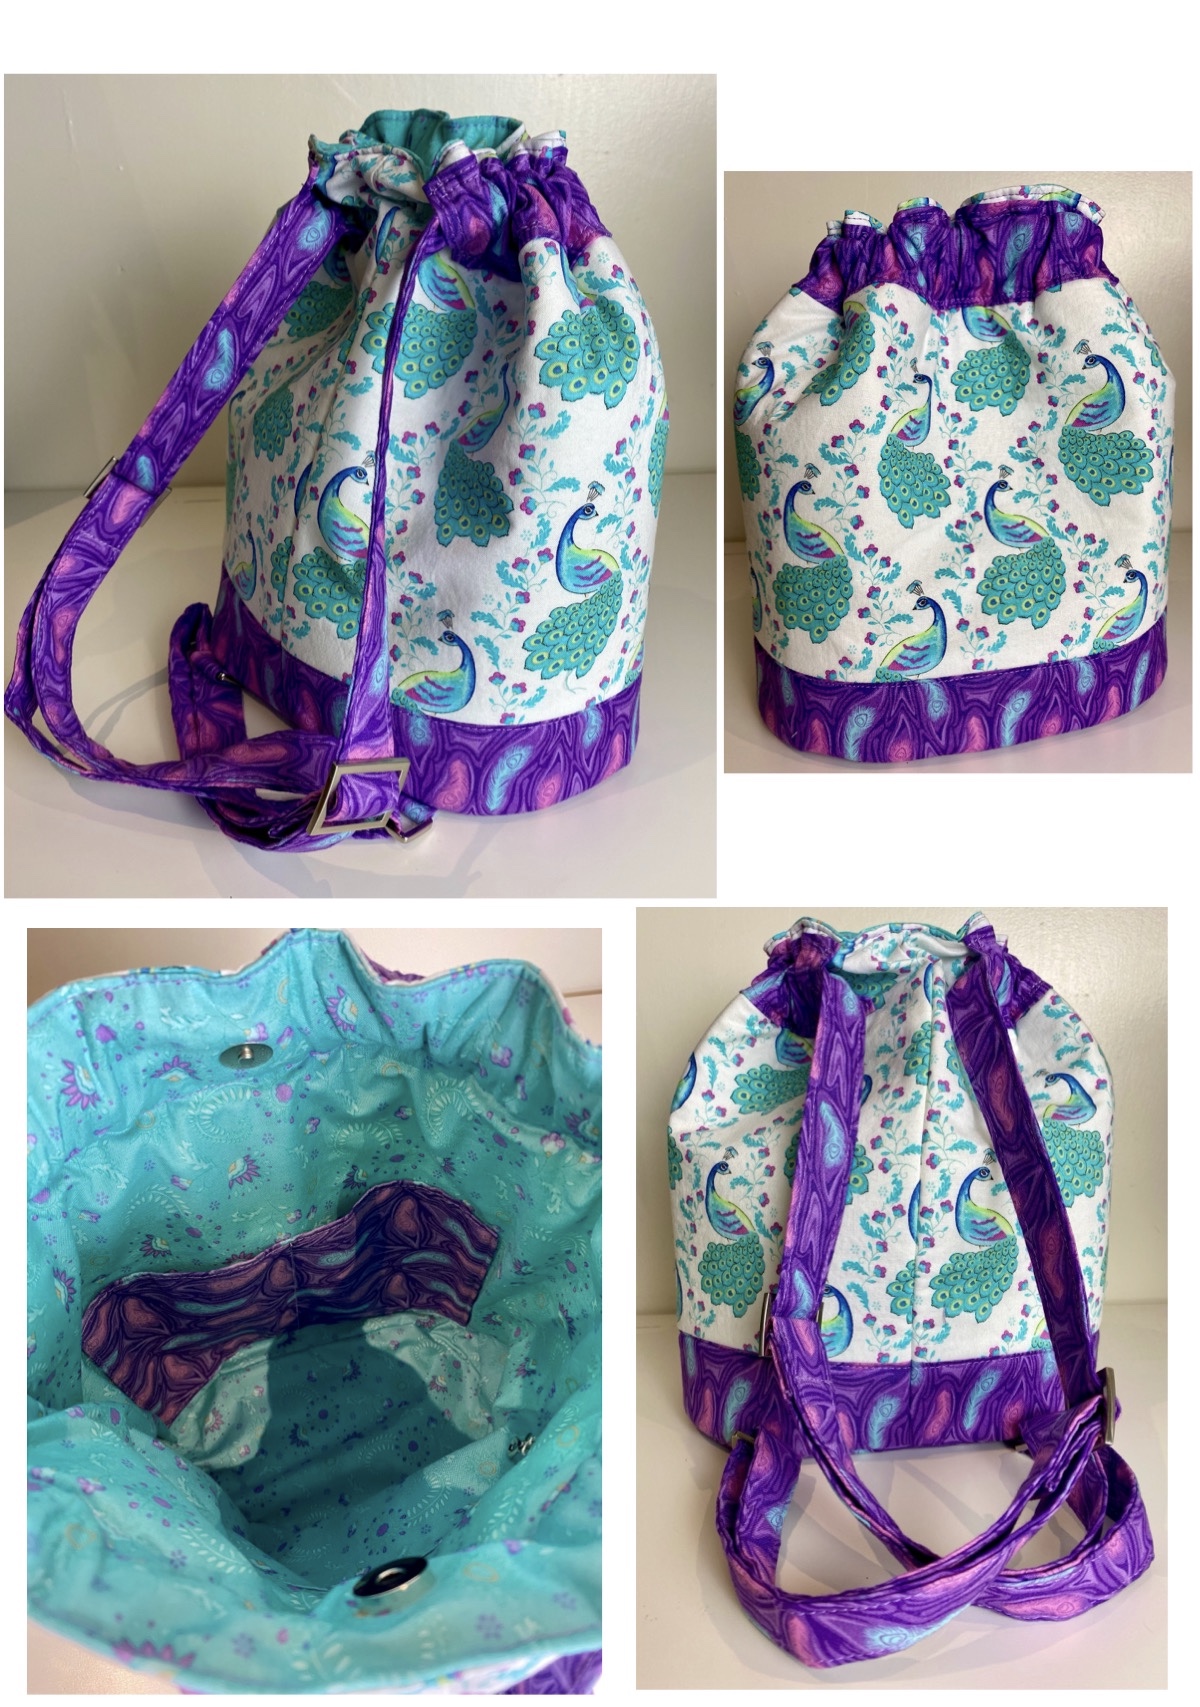 The Duffel Backpack made by Laura of Handmade by Laura Simons